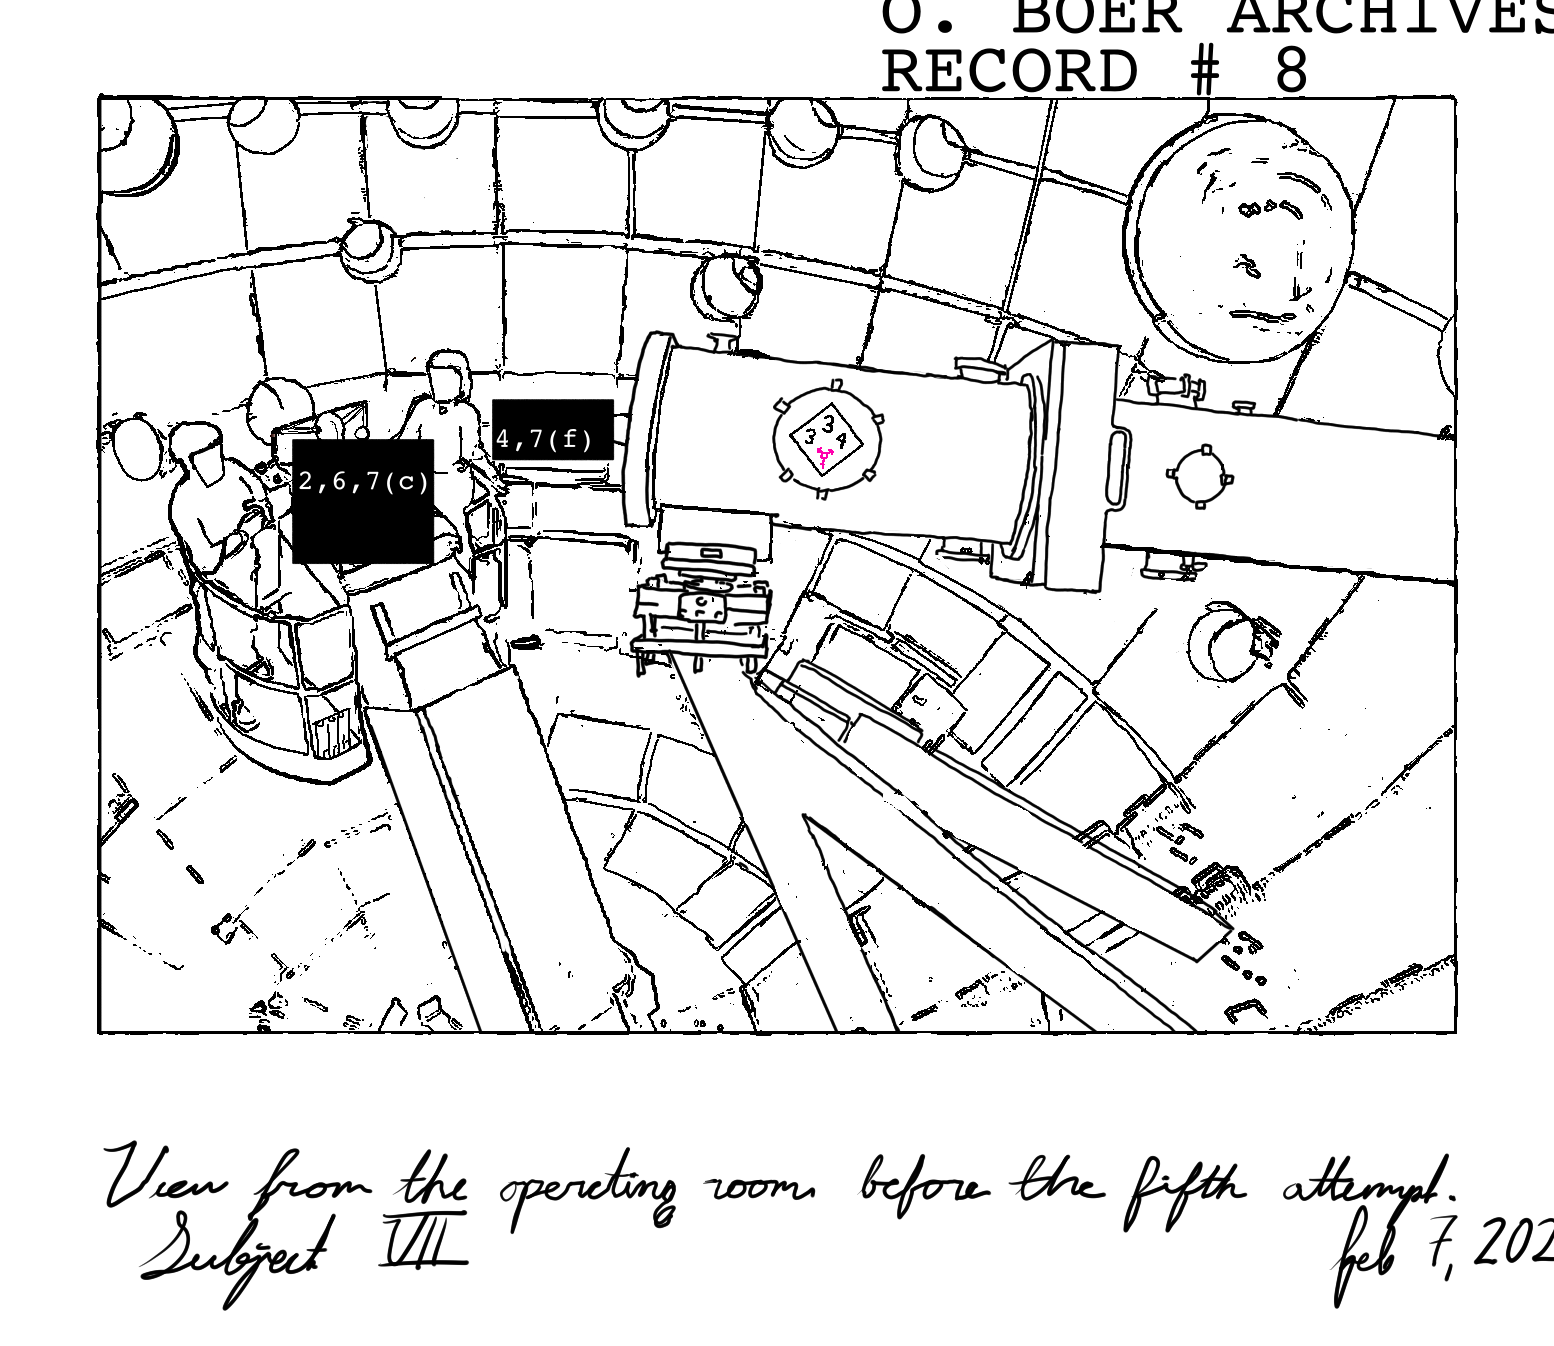 A line-art drawing of the inside of a science facility. The view shows a spherical room with paneled walls, perhaps 50 feet across, lined with circular lense apertures one to three meters in diameter. A thick pipe enters from the right, supported by a heavy framework, pointing at a basket on a heavy hydraulic arm in the middle of the room. The pipe is labled as a health hazard 3, fire hazard 3, reactivity level 4 in a hazmat sign, with the bottom quadrant saying only ⚧ in eyewatering pink. It is the only pink thing in the room. The basket contains two people in hazmat suits. Between the two people in hazmat suits is a redaction labeled '2, 6, 7(f)' and at the end of the pipe is a redaction labeled '4, 7(f)'.